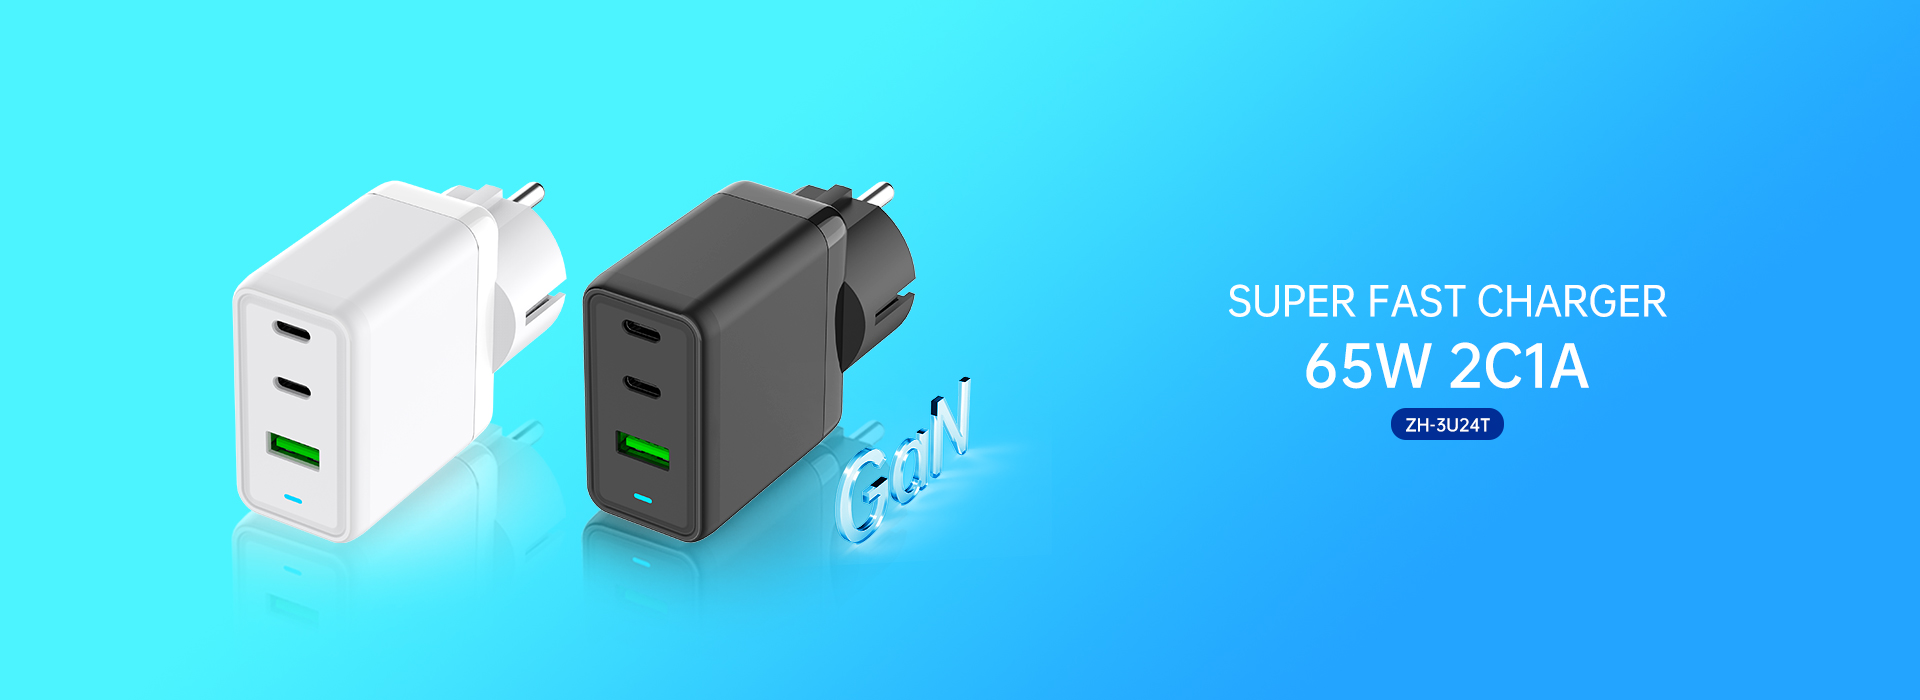 GaN Mini Family Fast Charger